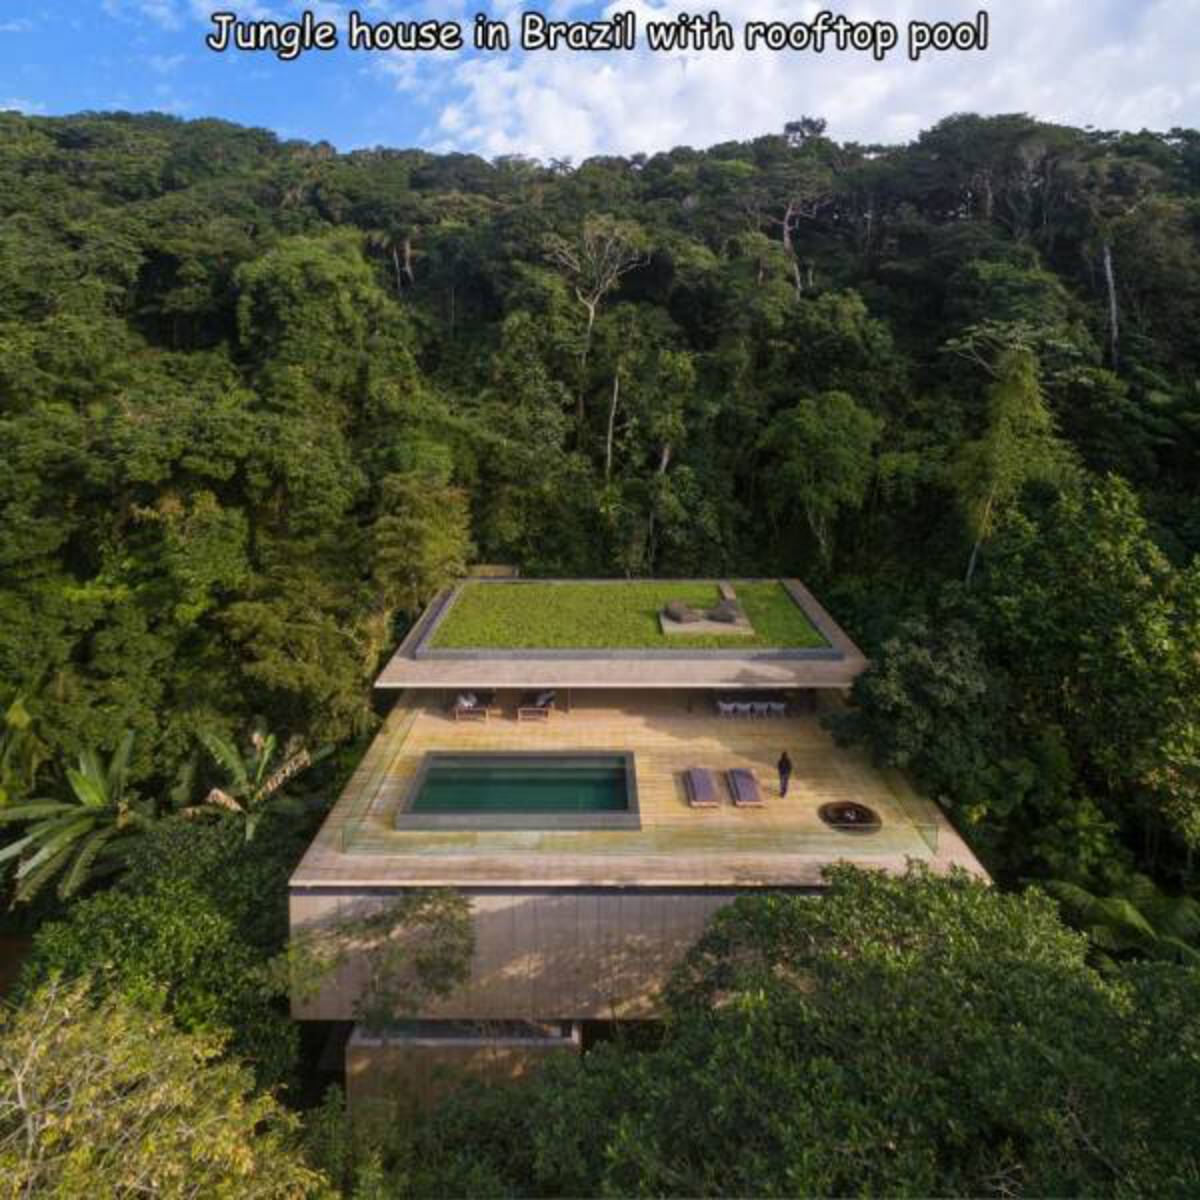 jungle side house - Jungle house in Brazil with rooftop pool